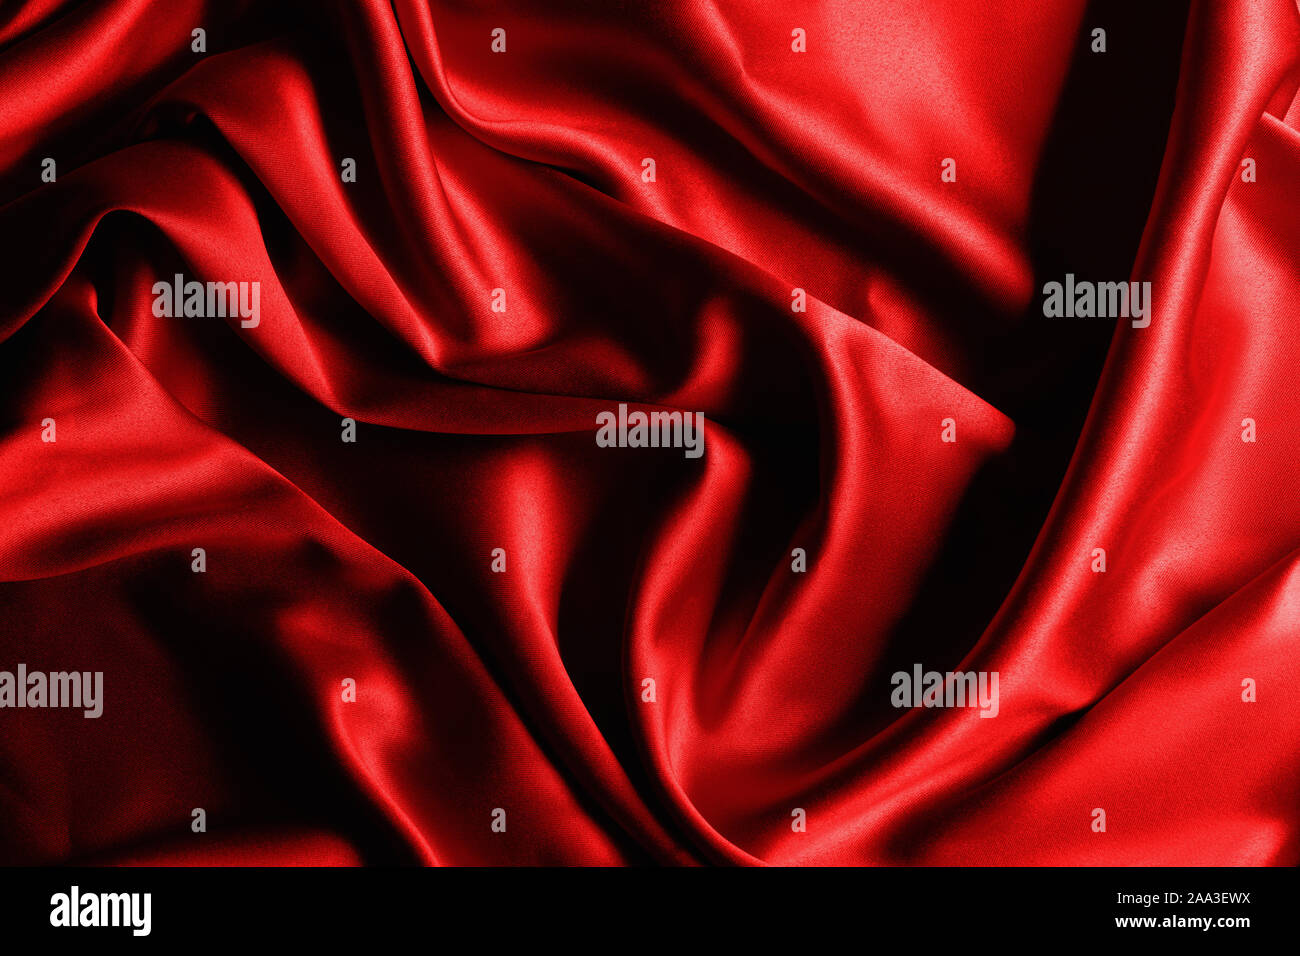 Red silk close up texture background. Stock Photo